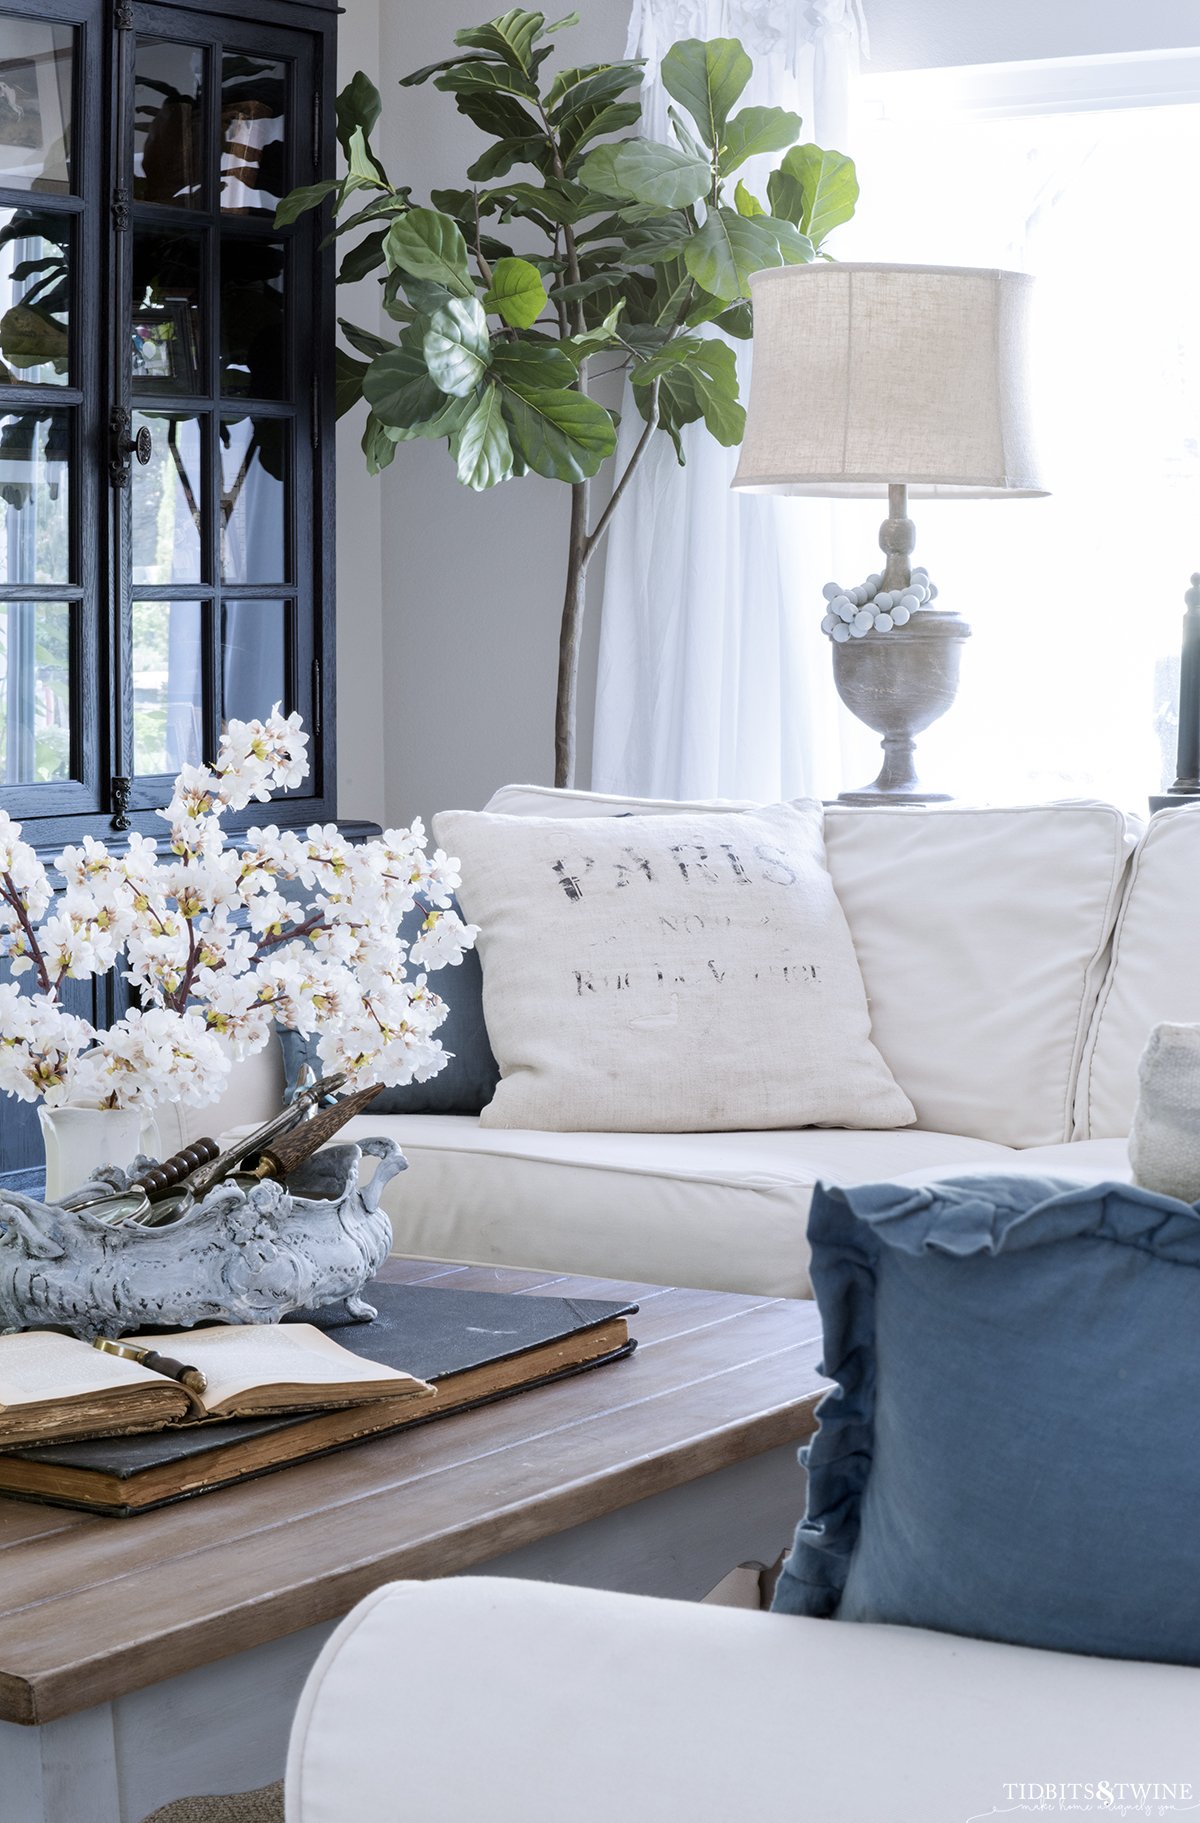 living room with white slipcovered sectional and blue throw pillows french coffee table with cherry blossoms in a vase on top